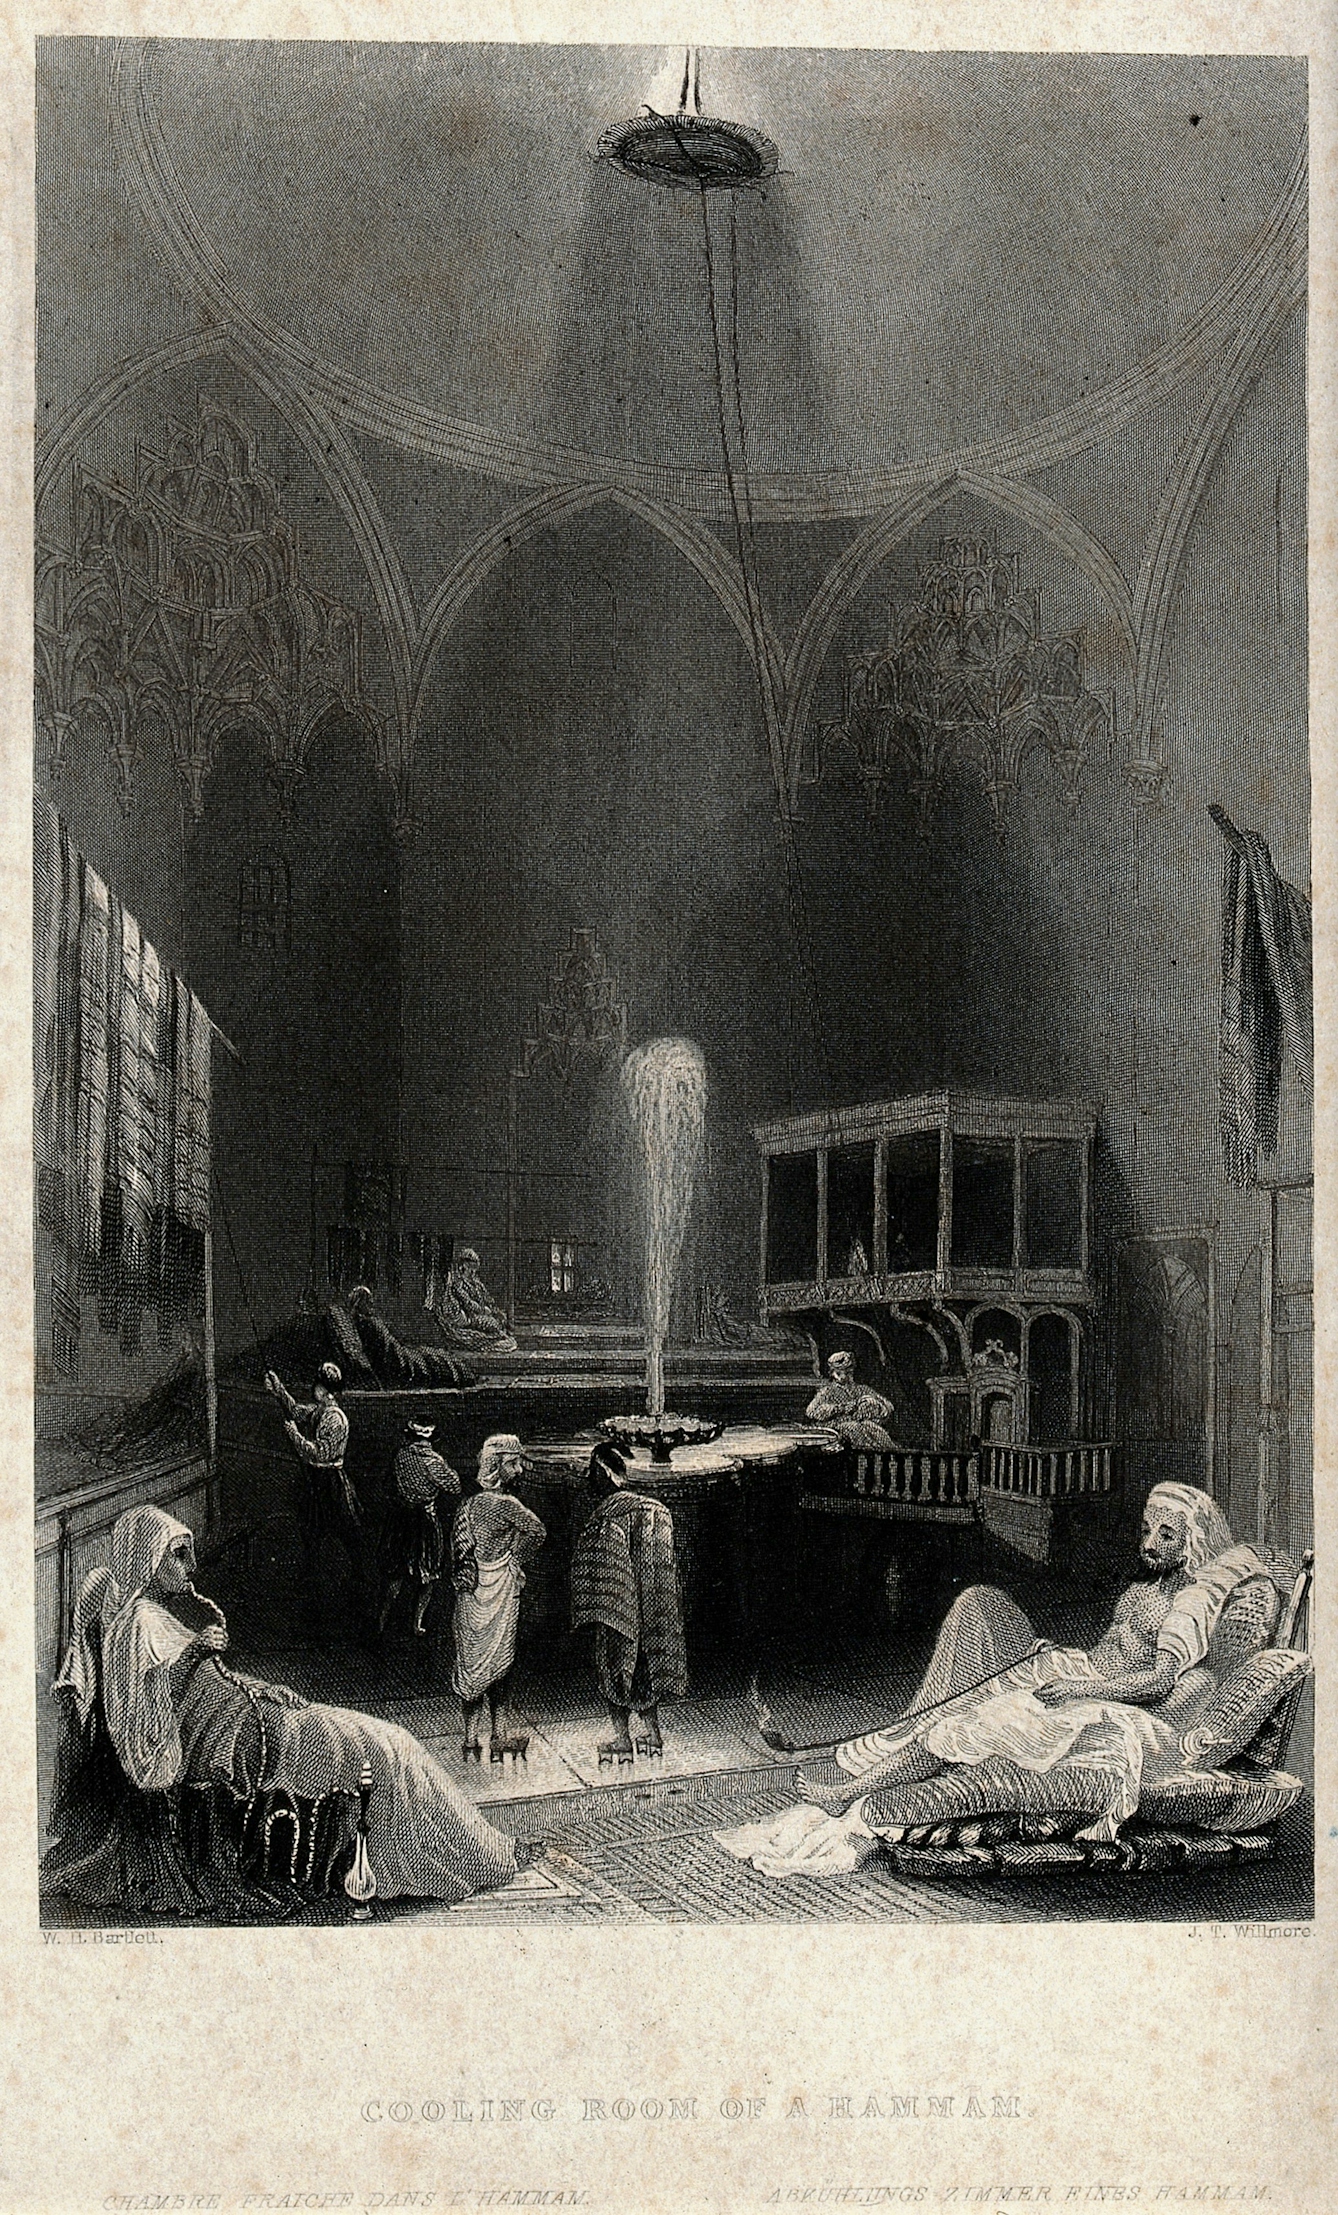 Black and white engraving depicting the cooling room of a hammam, showing people reclining and smoking around a fountain.